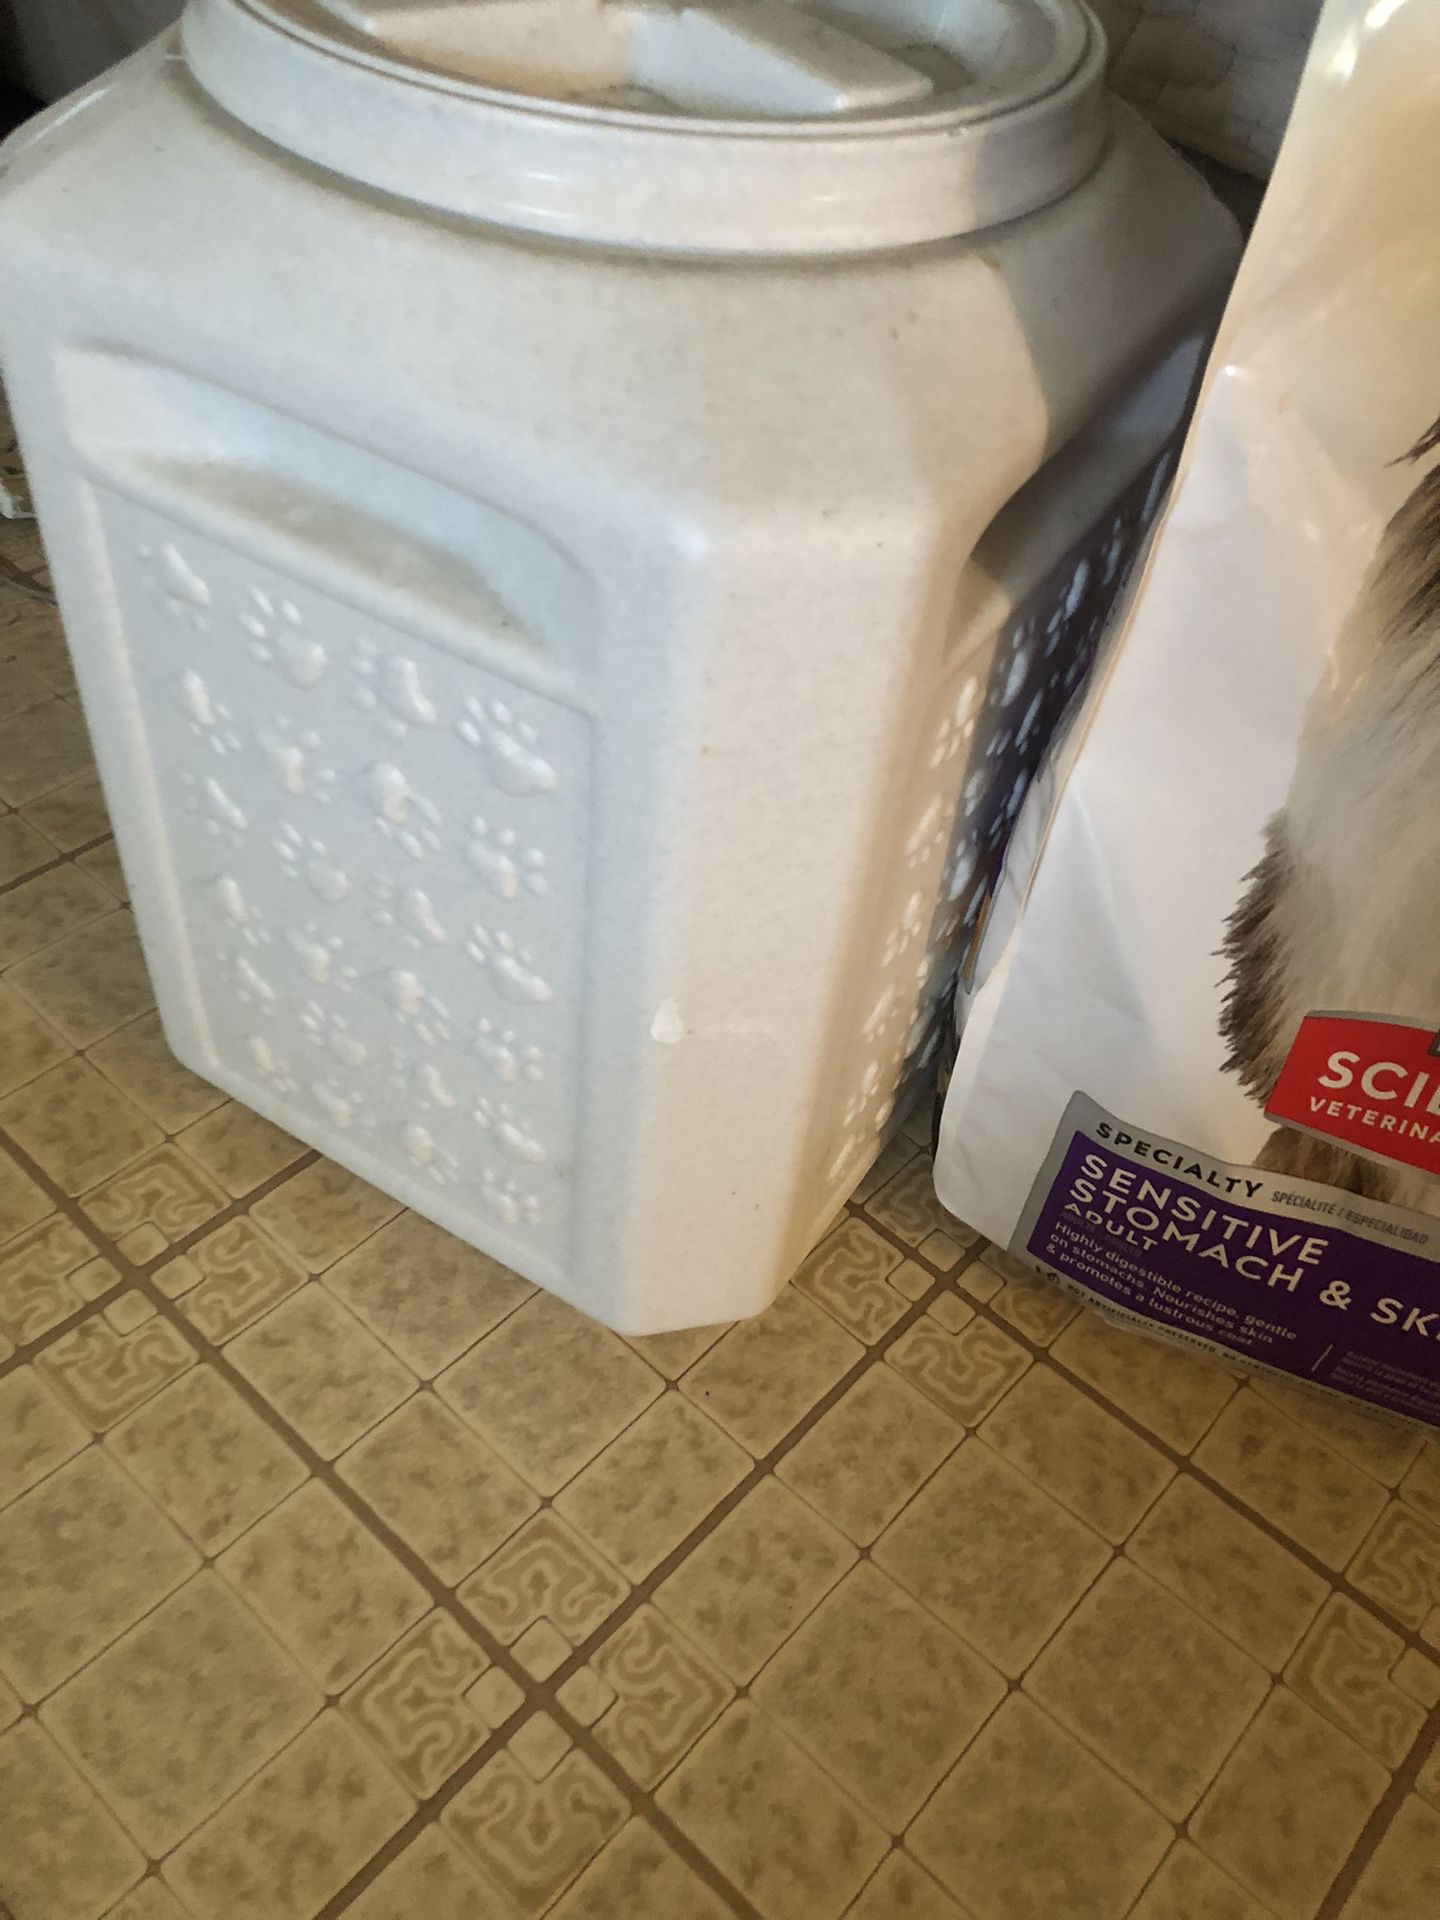 Dog Food Container & Some Free Food